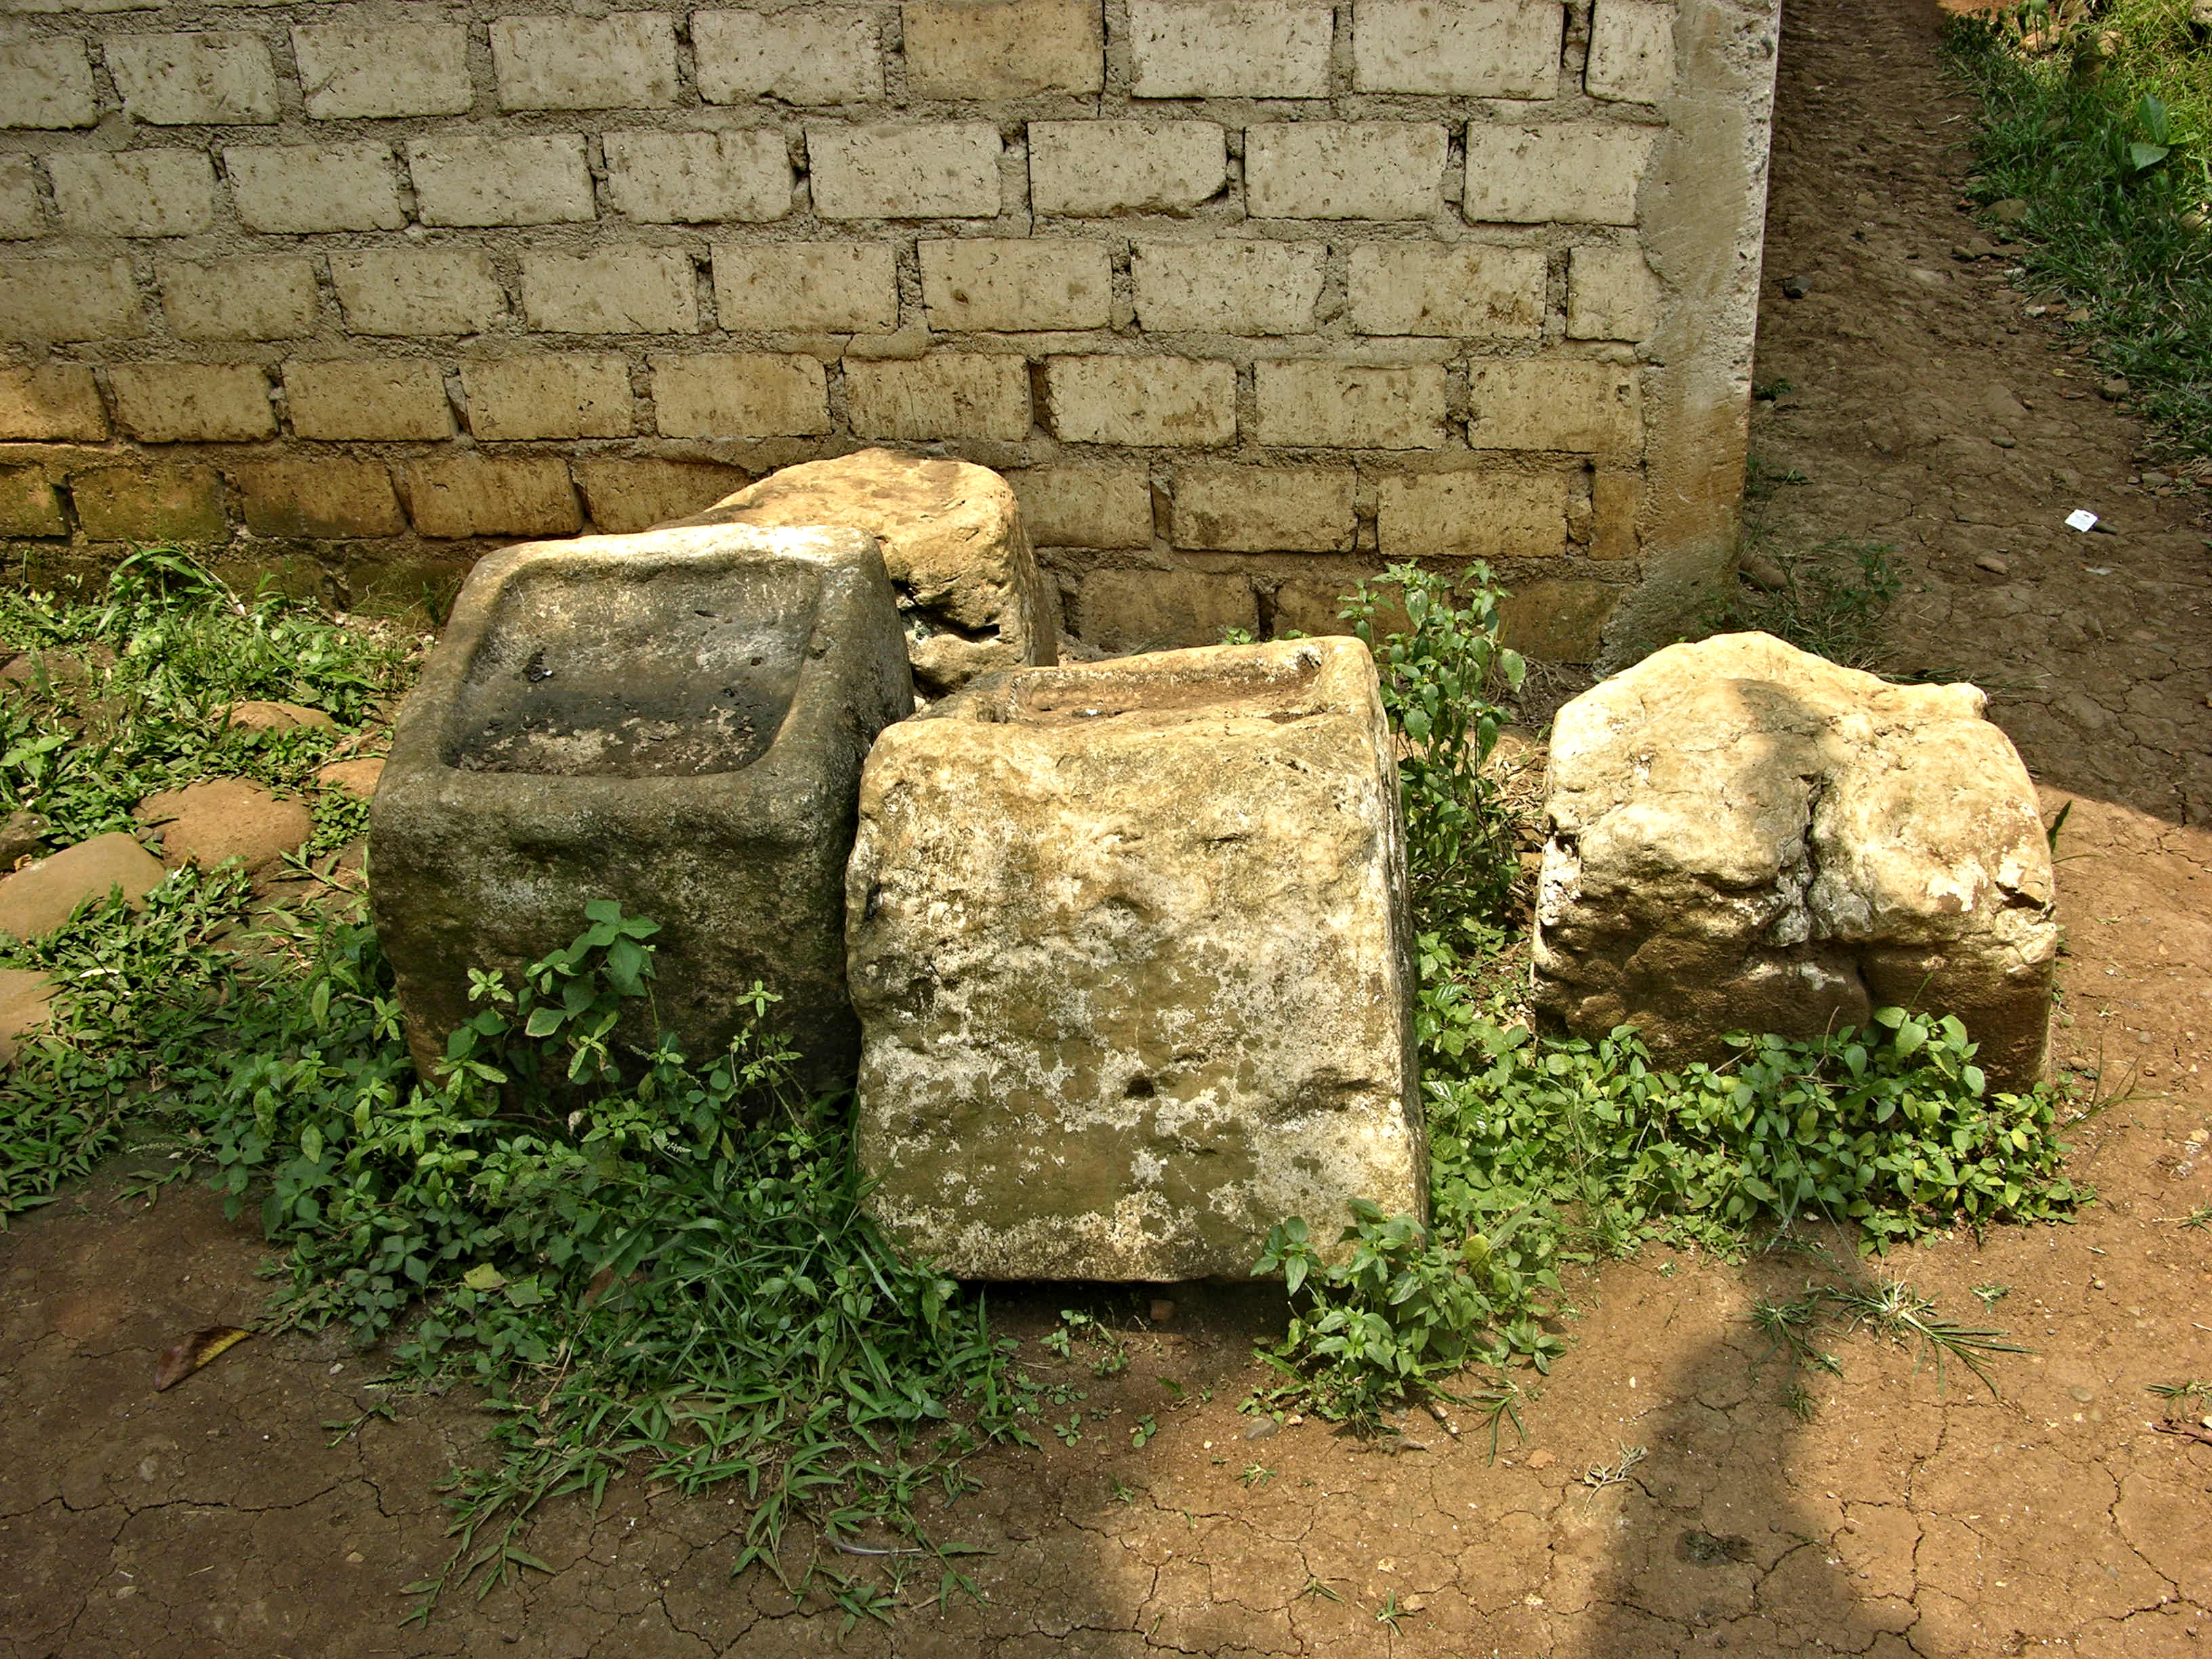 Foundation stones of Tarumanagara Age found in Ciaruteun Village, Ciampea District, Bogor Province, West Java, Indonesia, 2008.09.16. The large cubic stones of ca. 50 cm square, with a concave of ca.40 cm square on the upper side must have been of use for a palace or some magnificent building.